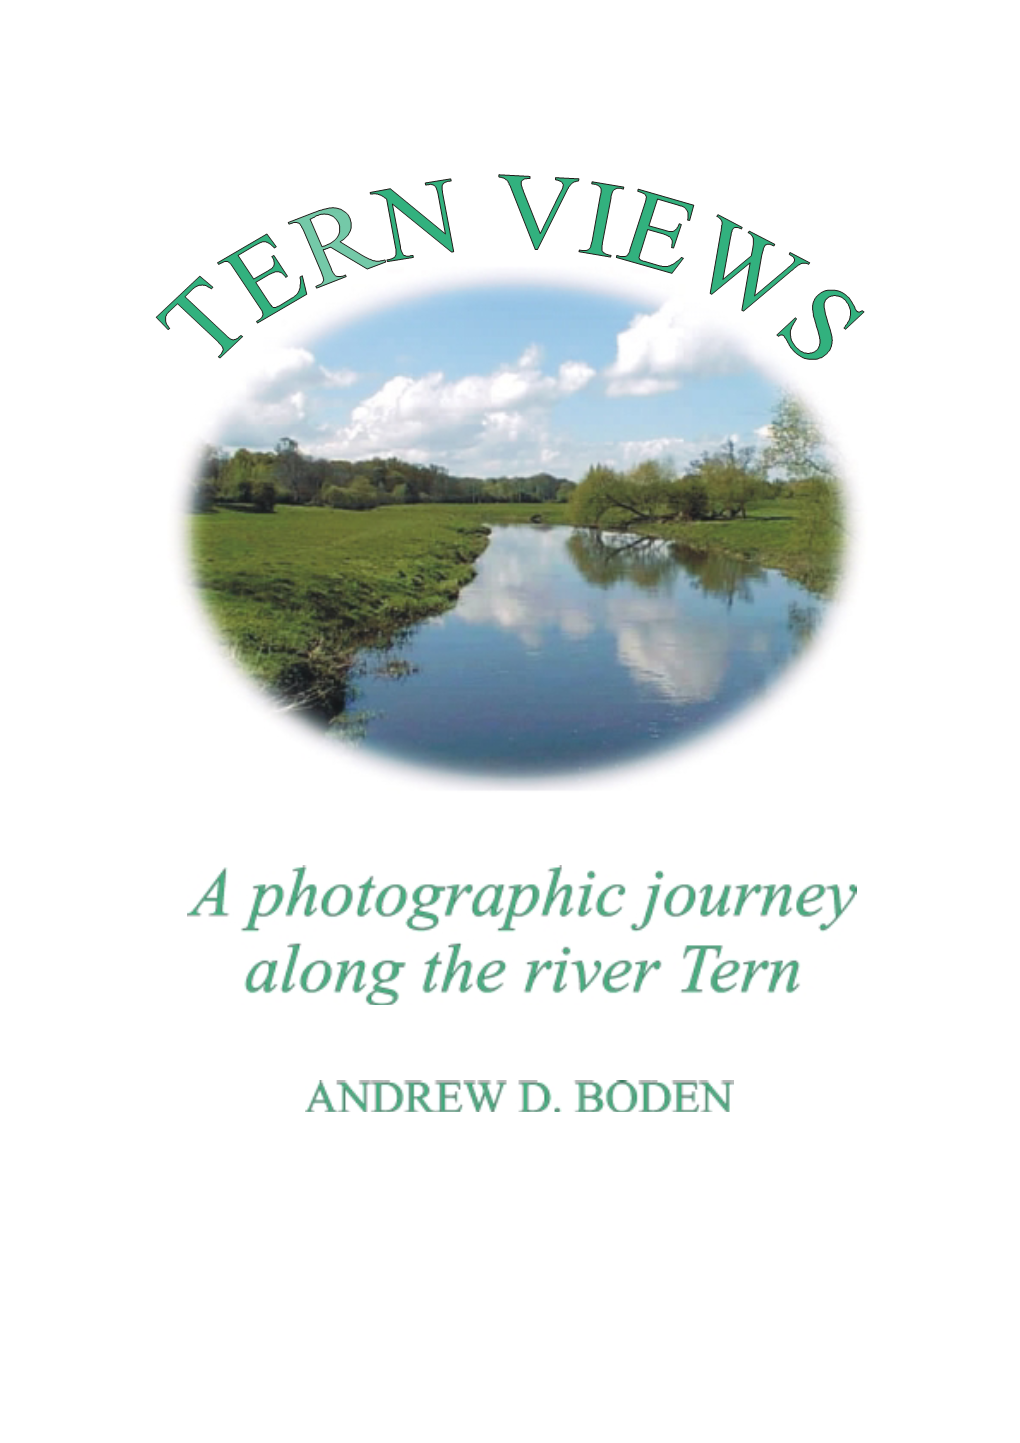 A Photographic Journey Along the River Tern by Andrew D. Boden